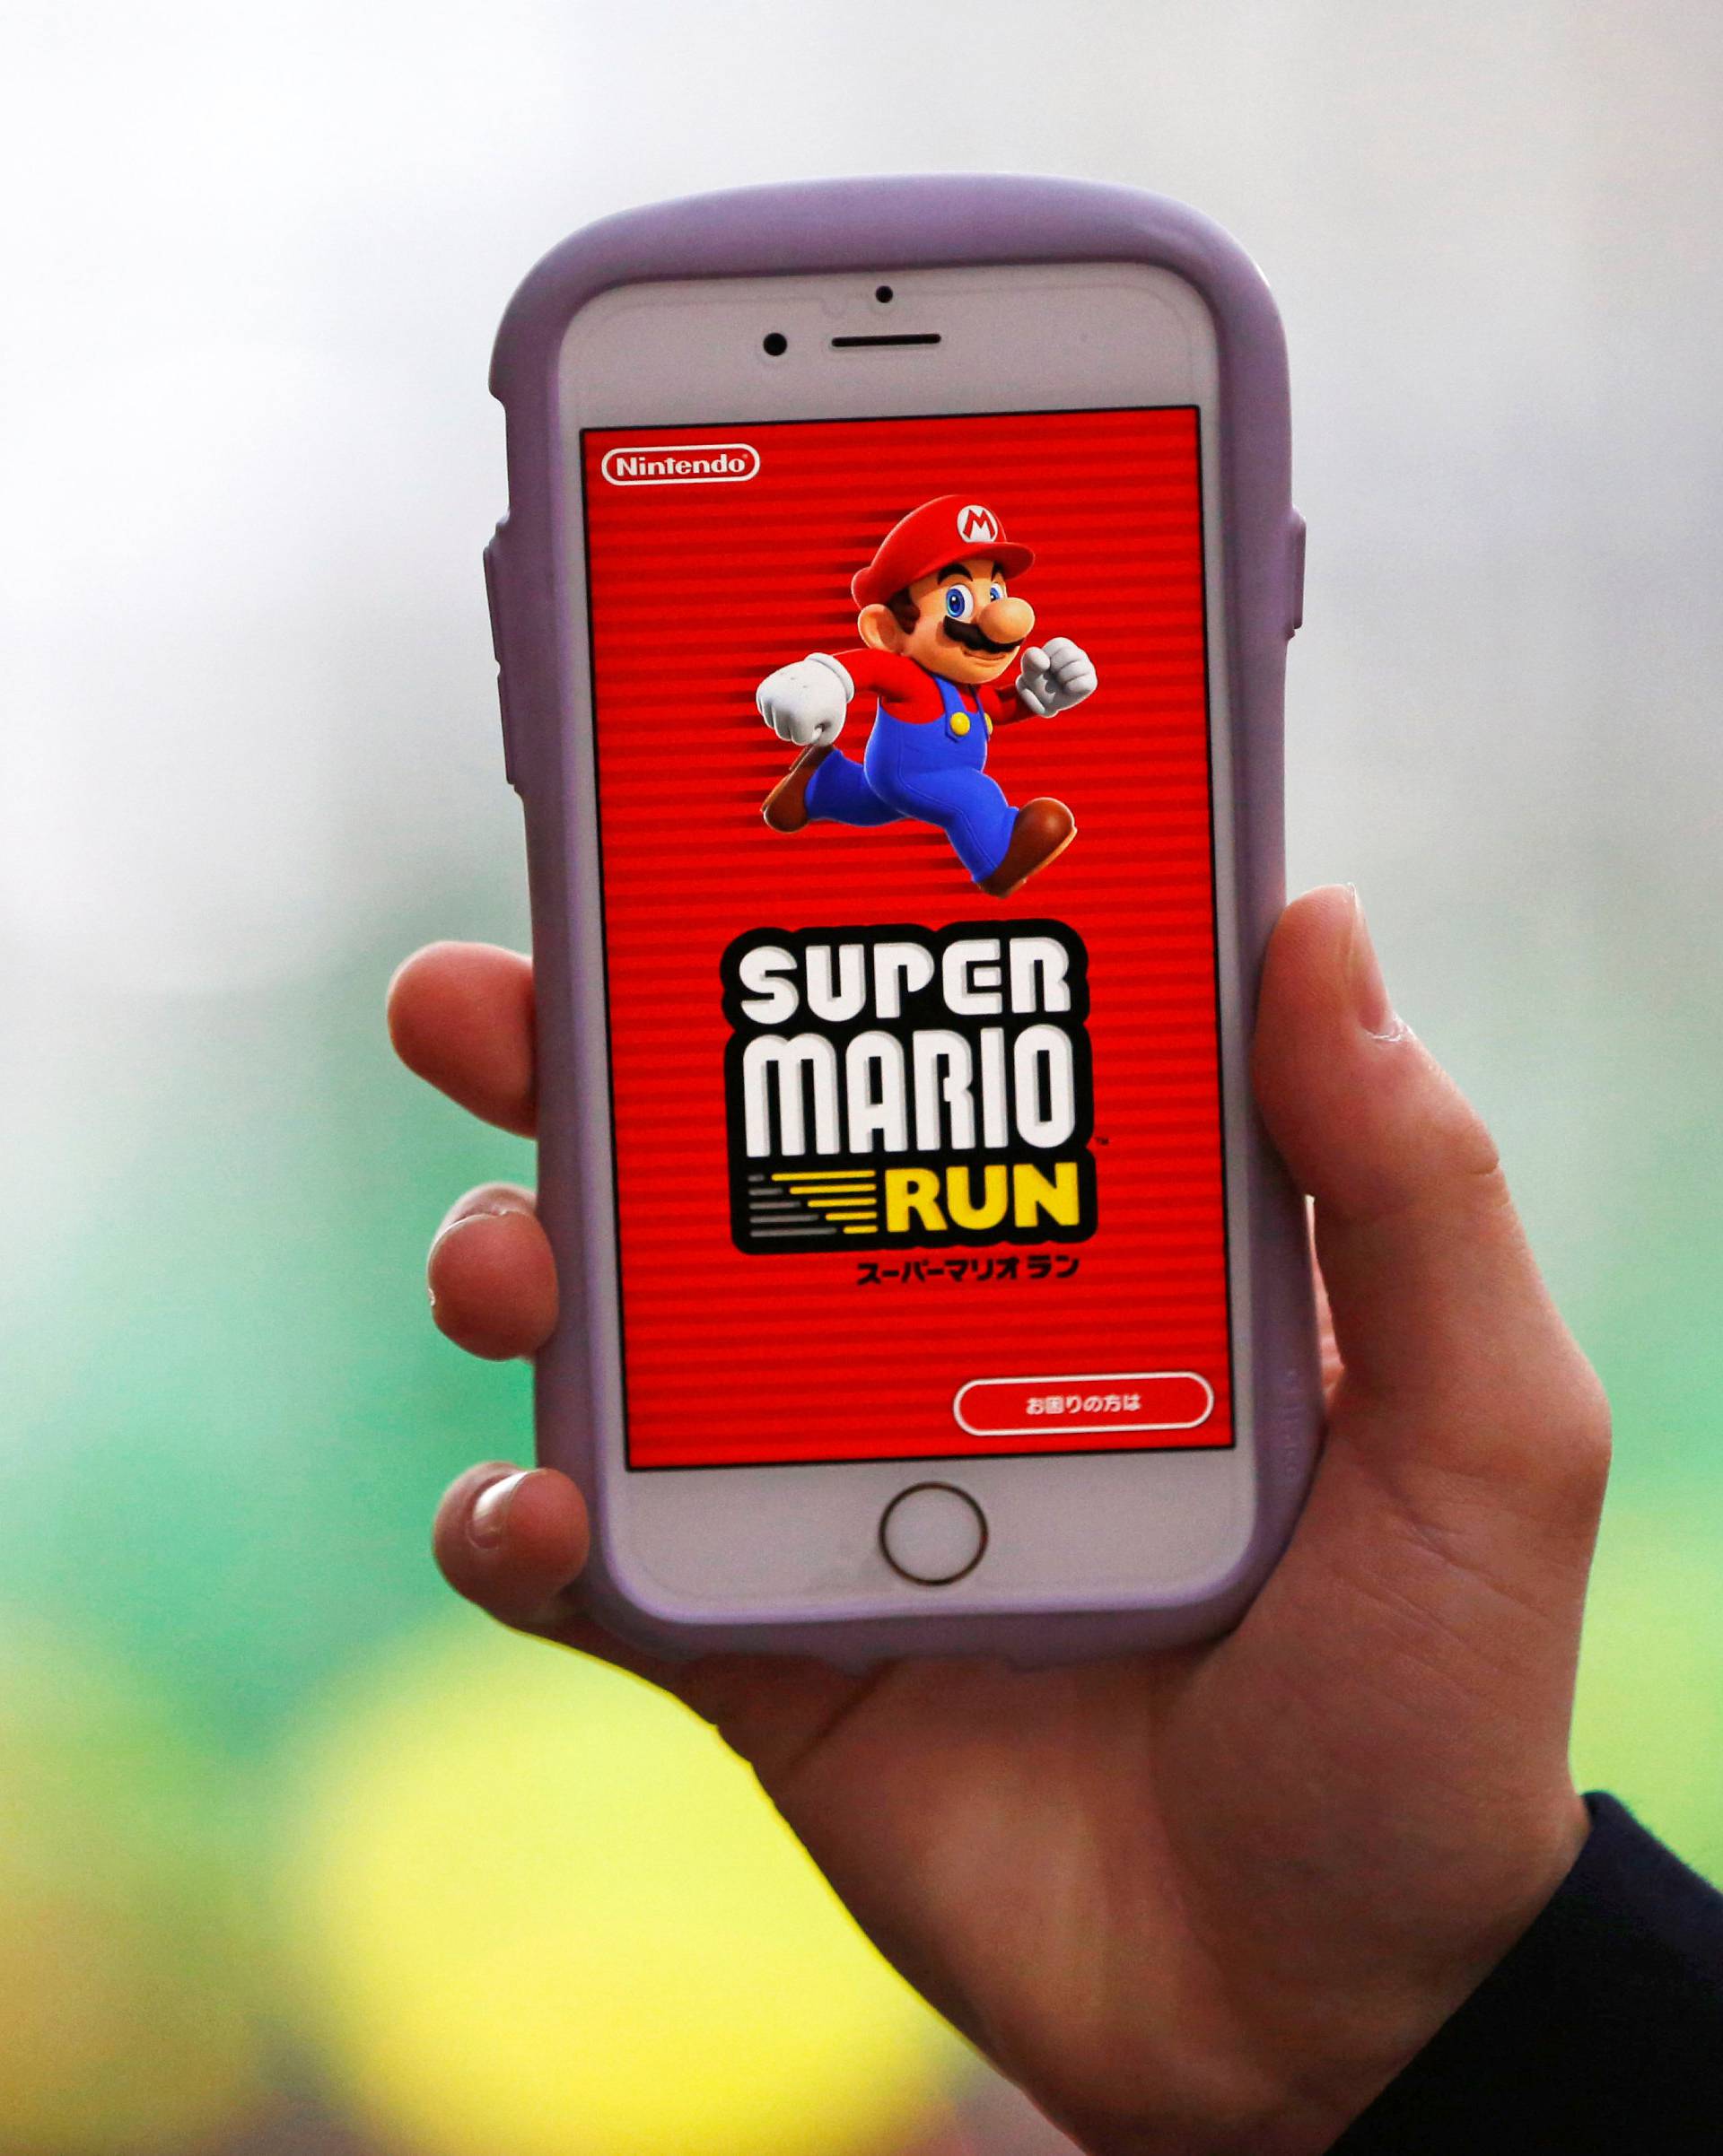 A person poses to display Nintendo's "Super Mario Run" game on a mobile phone in Tokyo, Japan